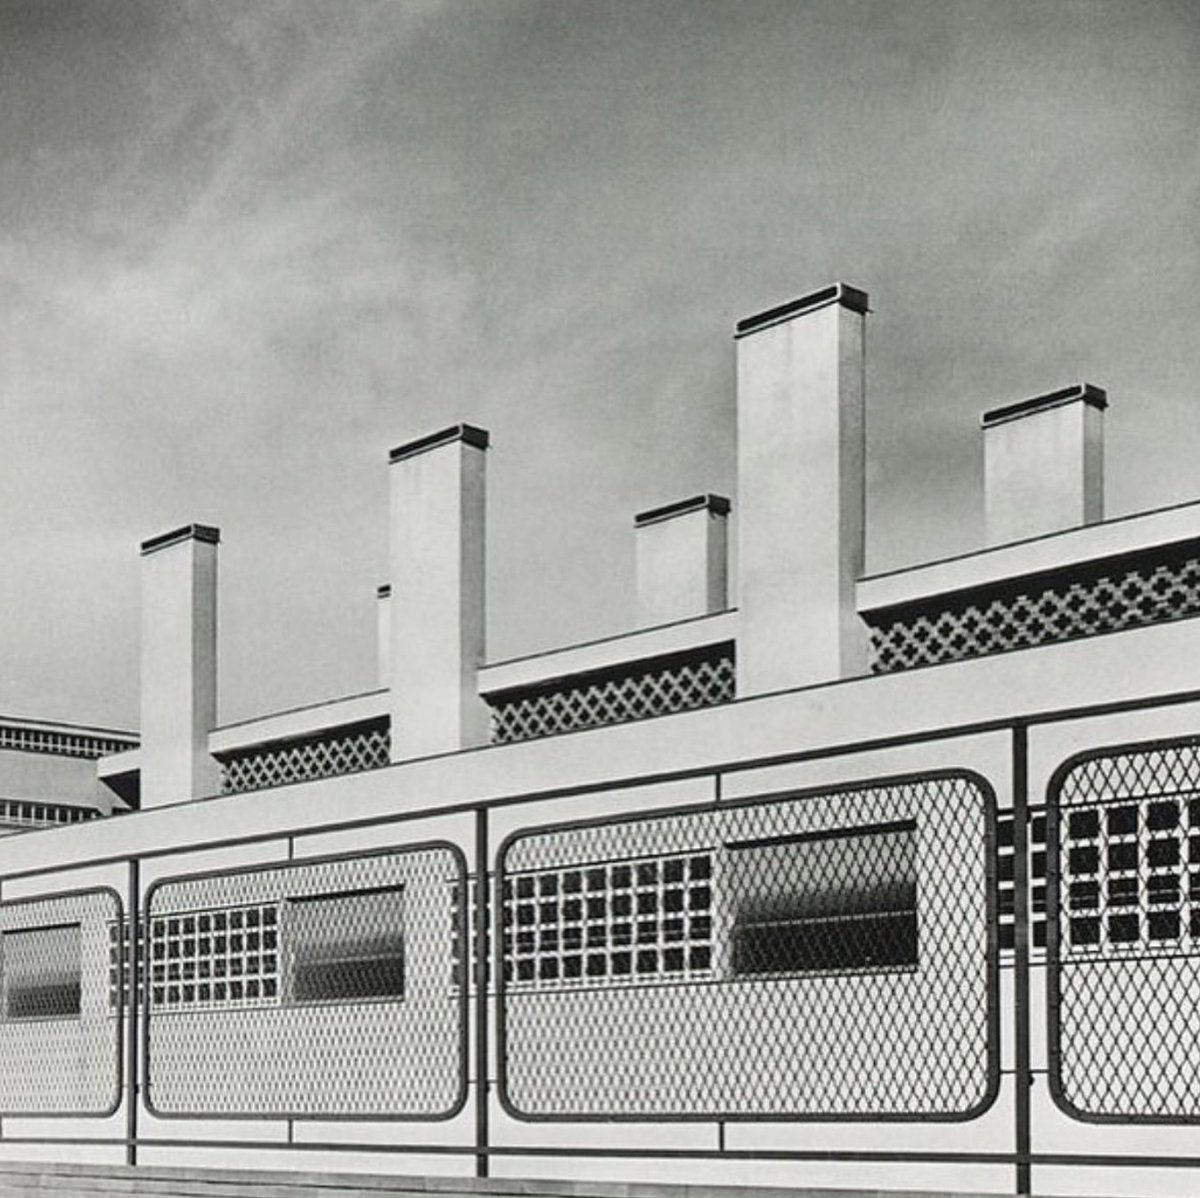 Carlo Mollino | 2. Other ambitious Italian architects of his generation congregated in Milan, but Mollino spent his working life in Turin, starting with a 1936 commission to design the headquarters, club and stables for the local horse racing association. instagram.com/p/C6p_4ulIKtu/